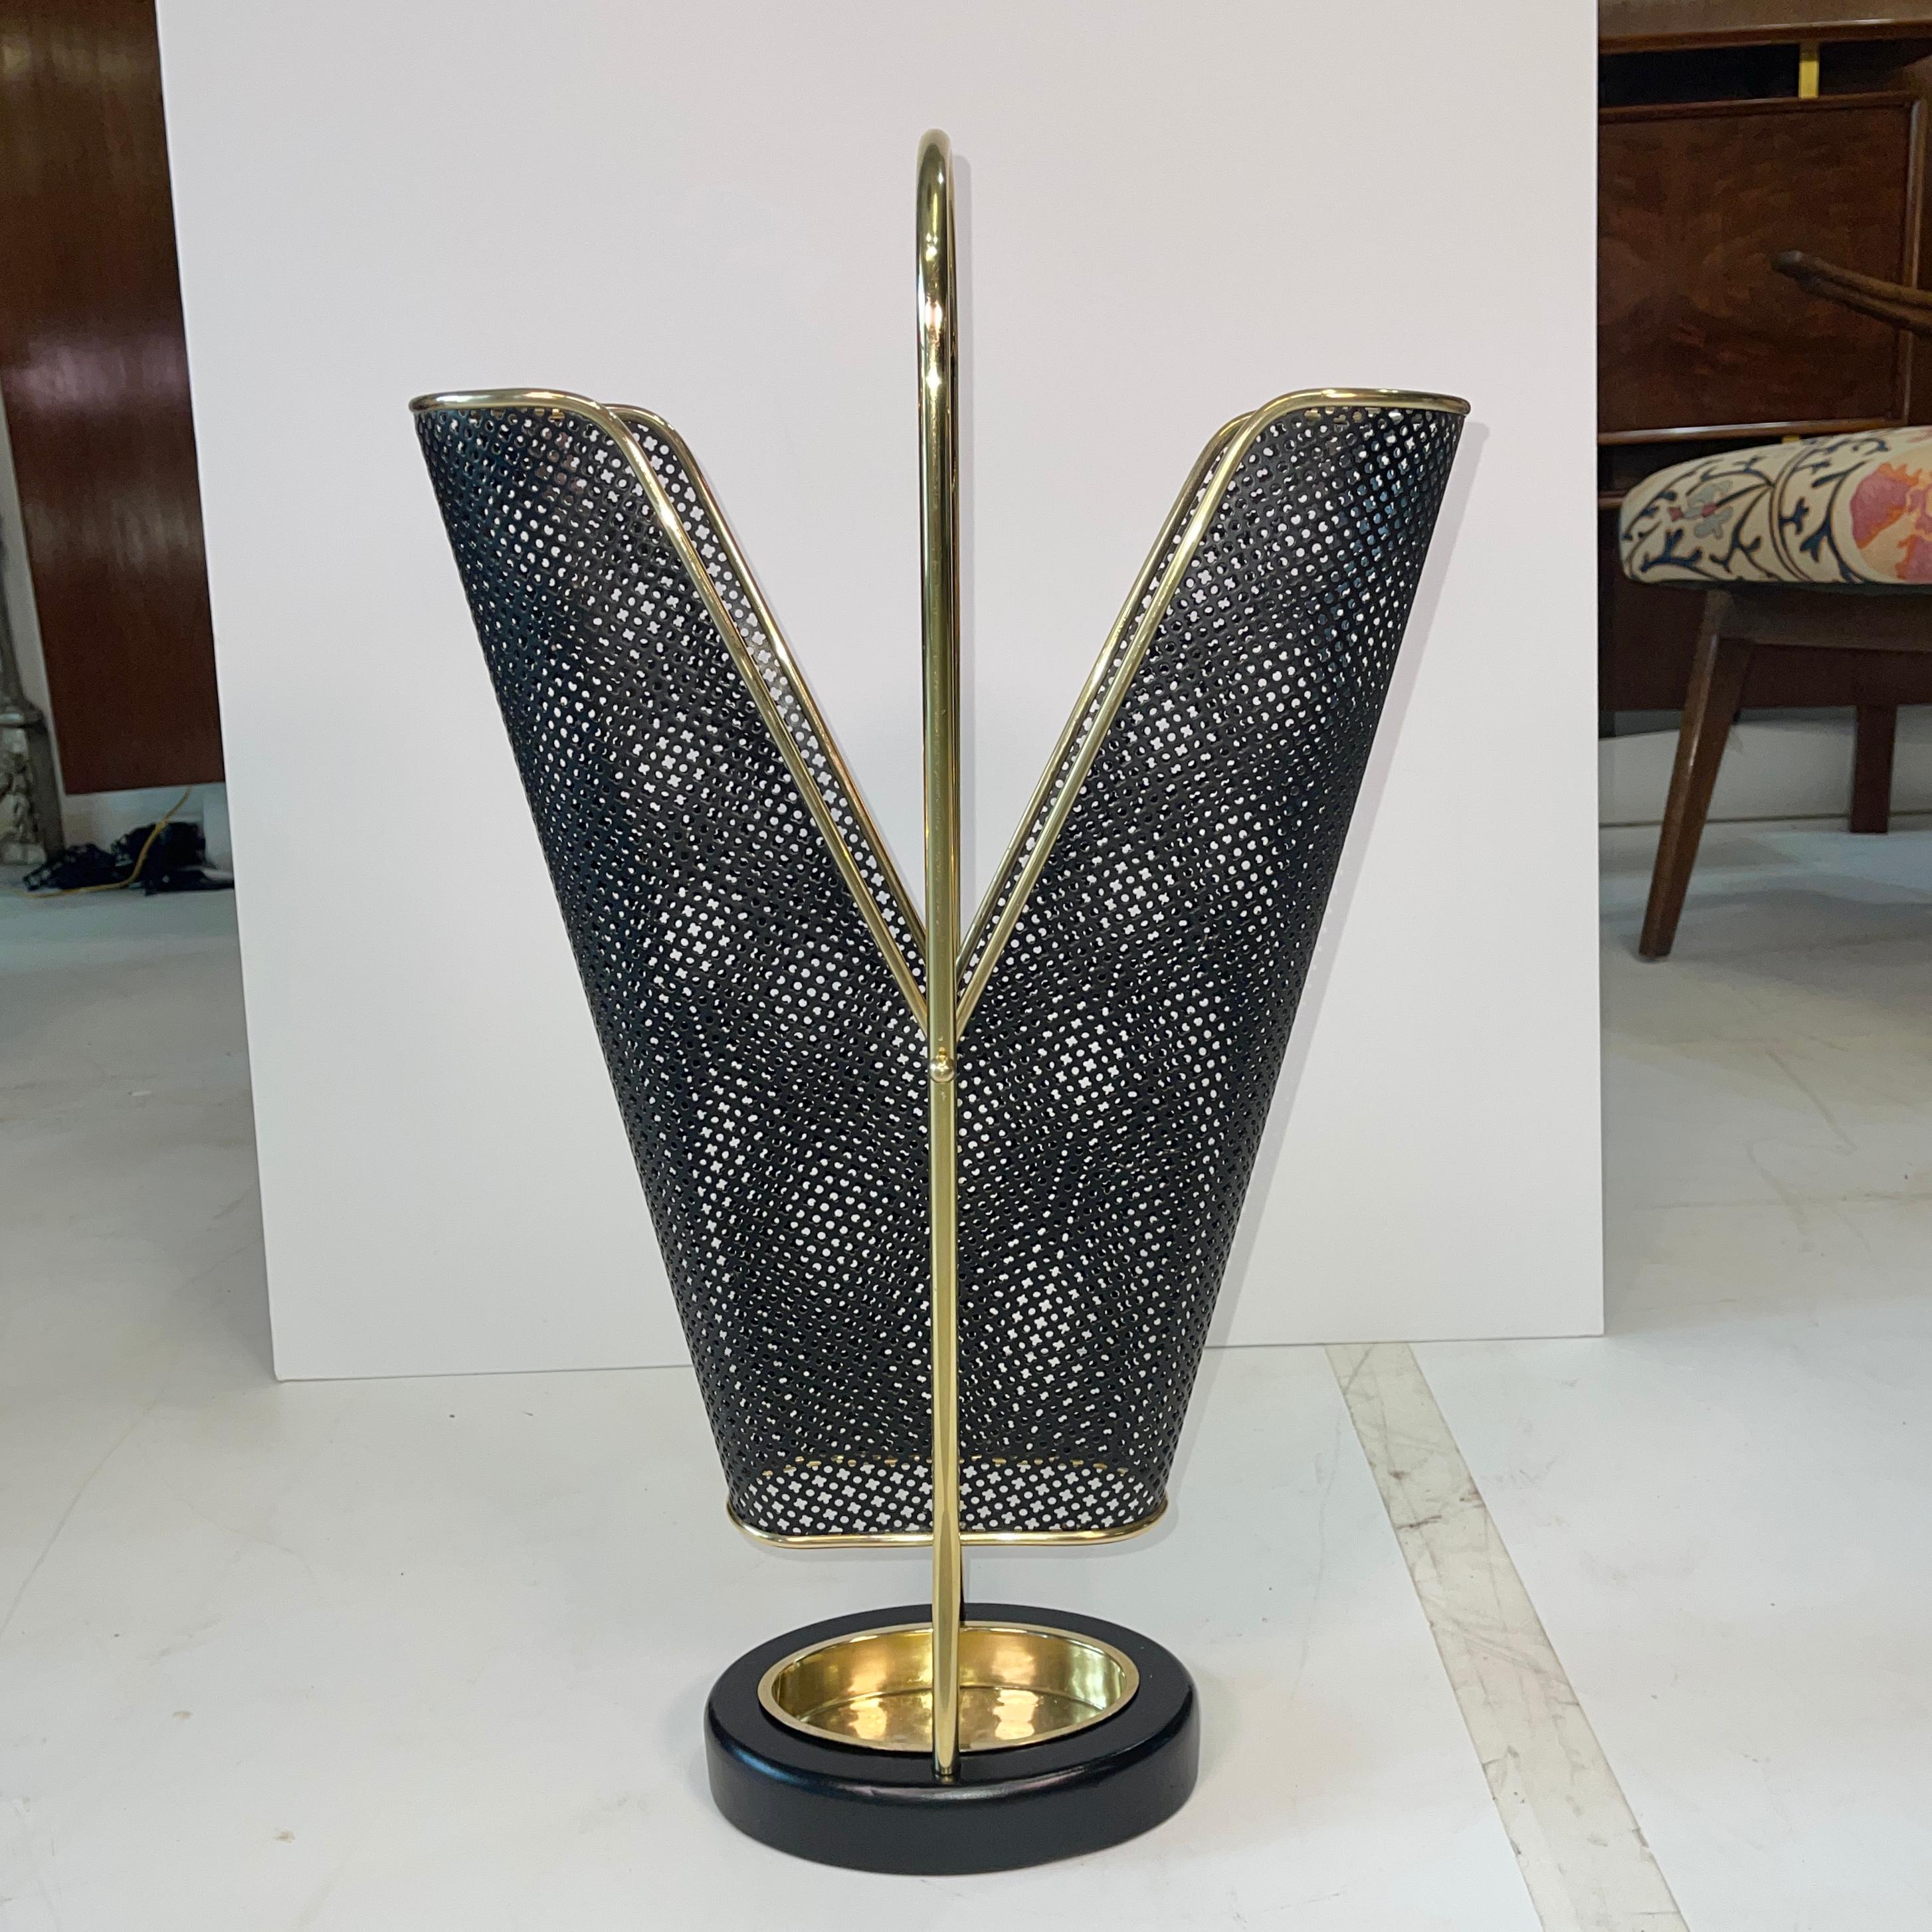 1950's German umbrella stand in brass and black enemaled perforated metal produced by Vereinigte Werkstätten München (United Workshop for Arts and Crafts).
Very well constructed as well as seriously chic.
The cast iron oval donut hole base is